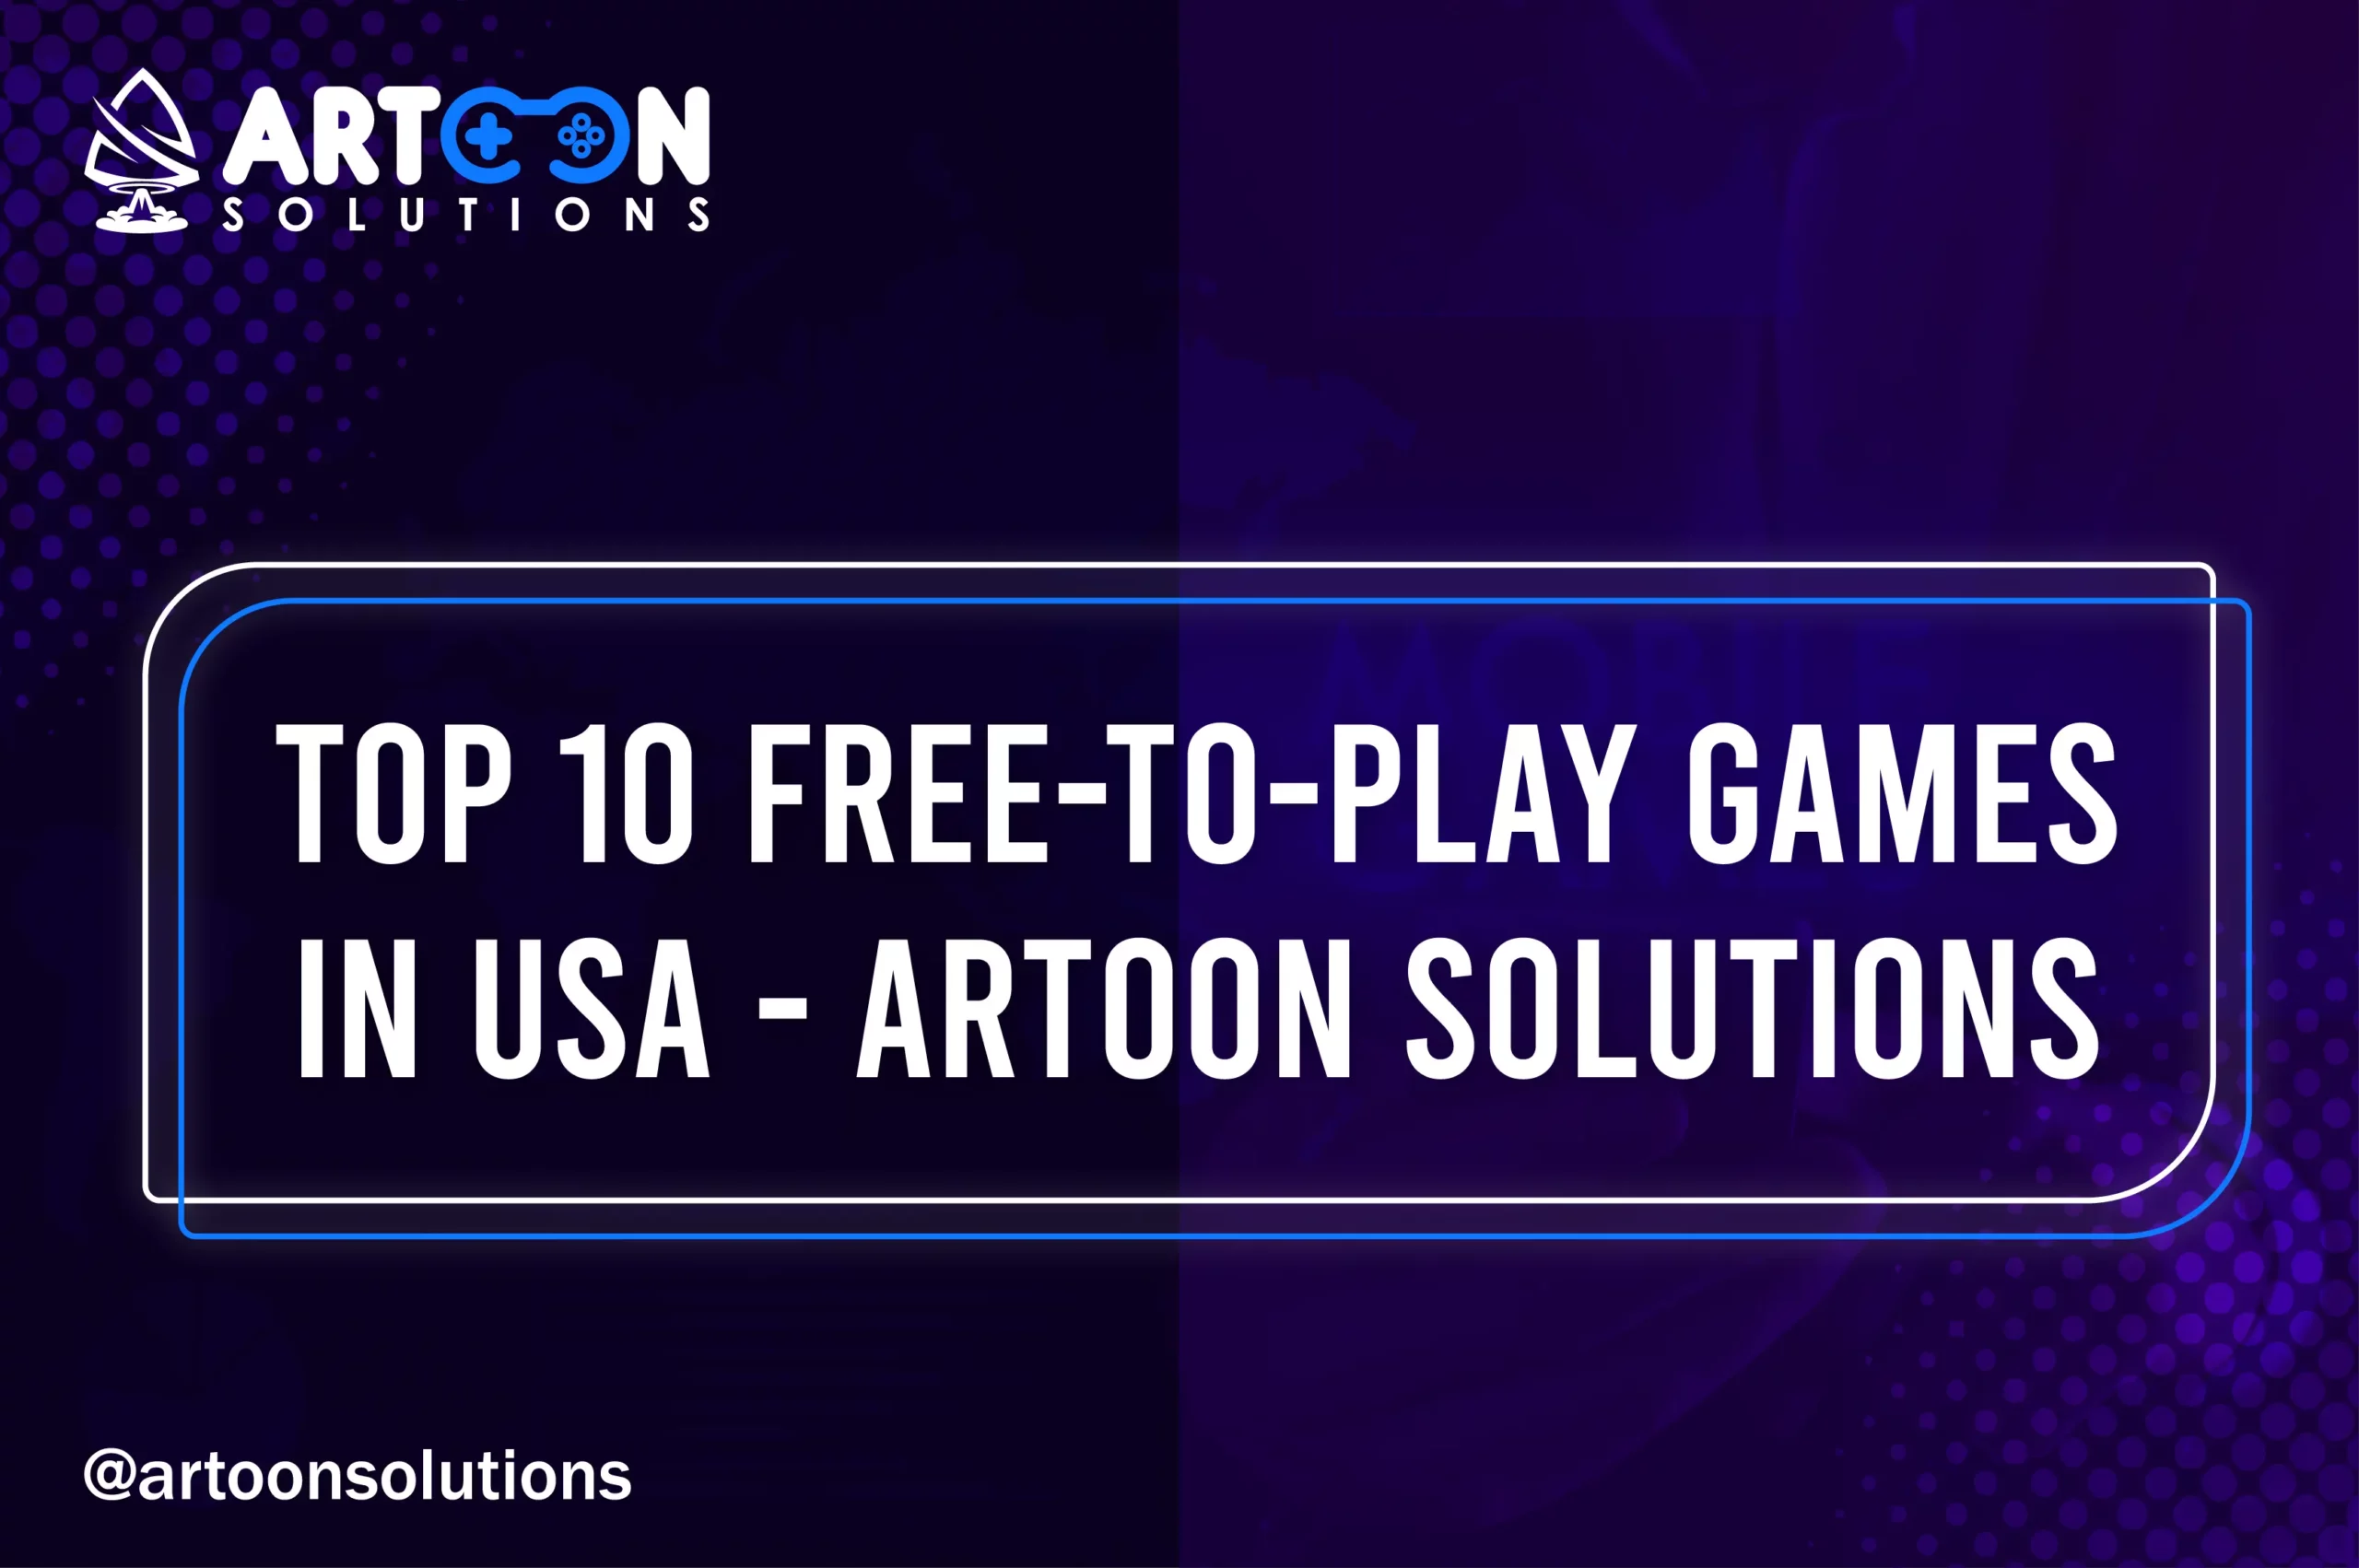 Top 10 Free-to-Play Games in USA